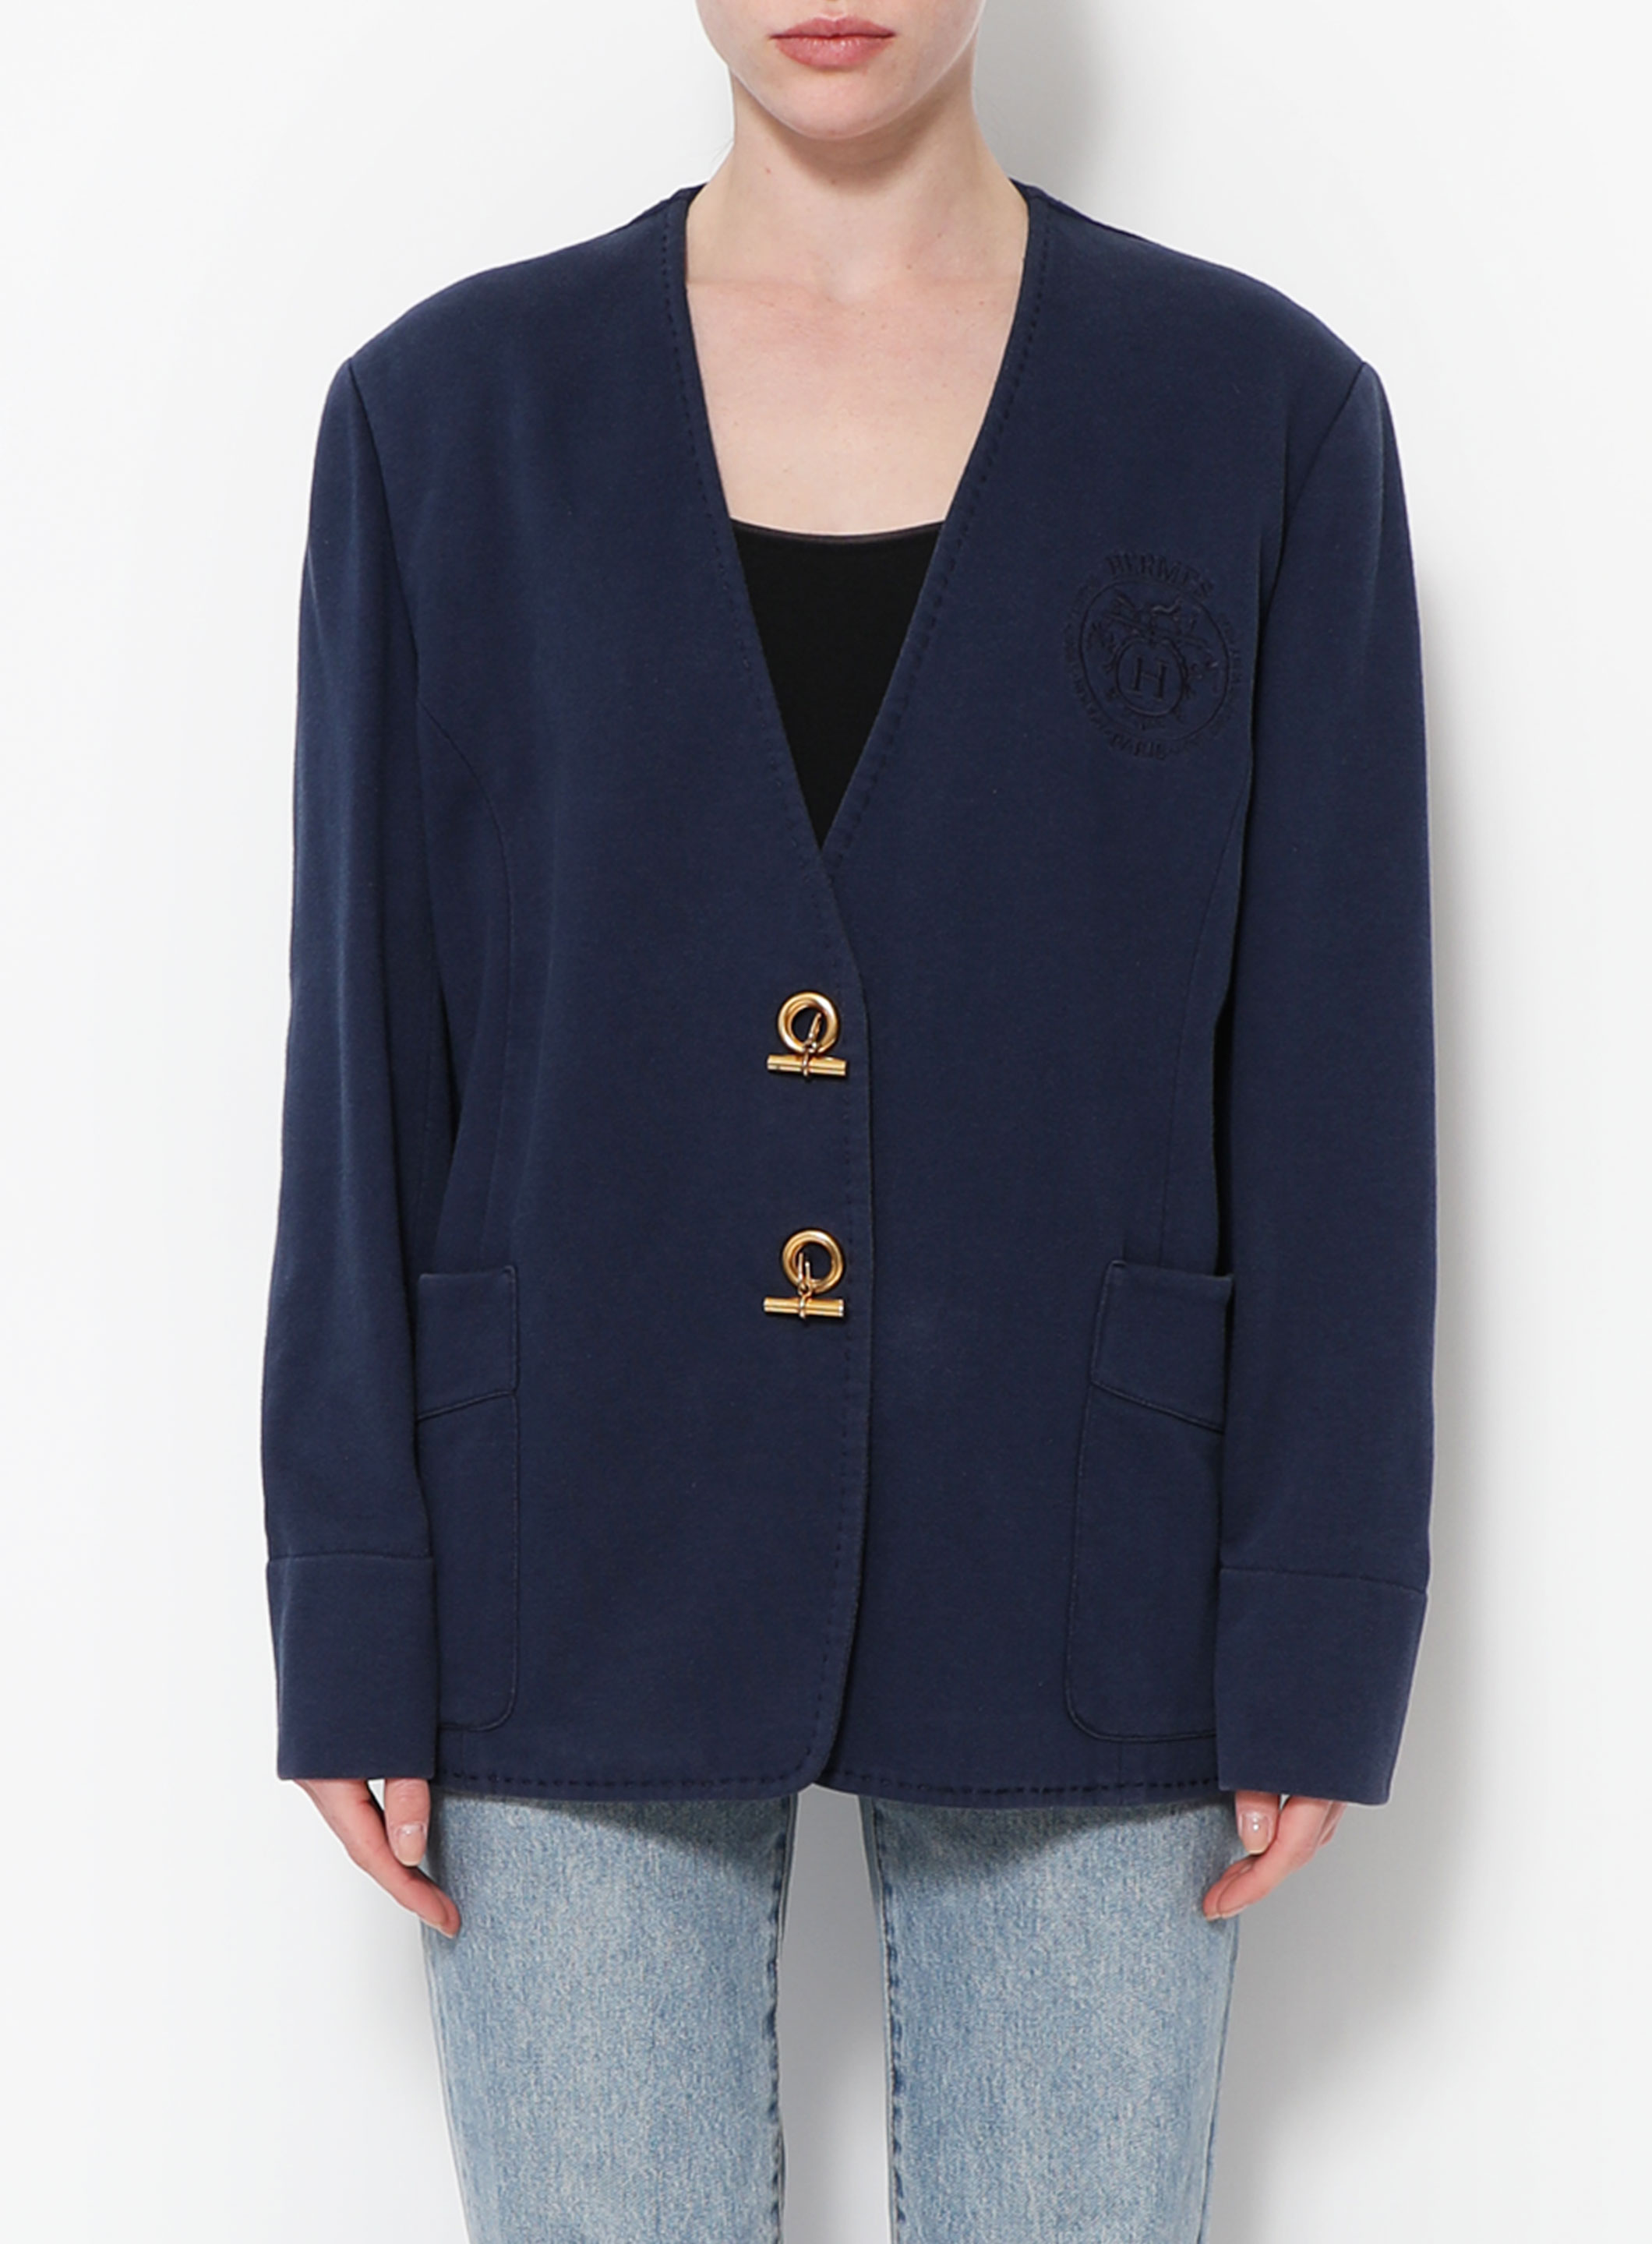 Louis Vuitton - Authenticated Jacket - Wool Blue for Women, Very Good Condition